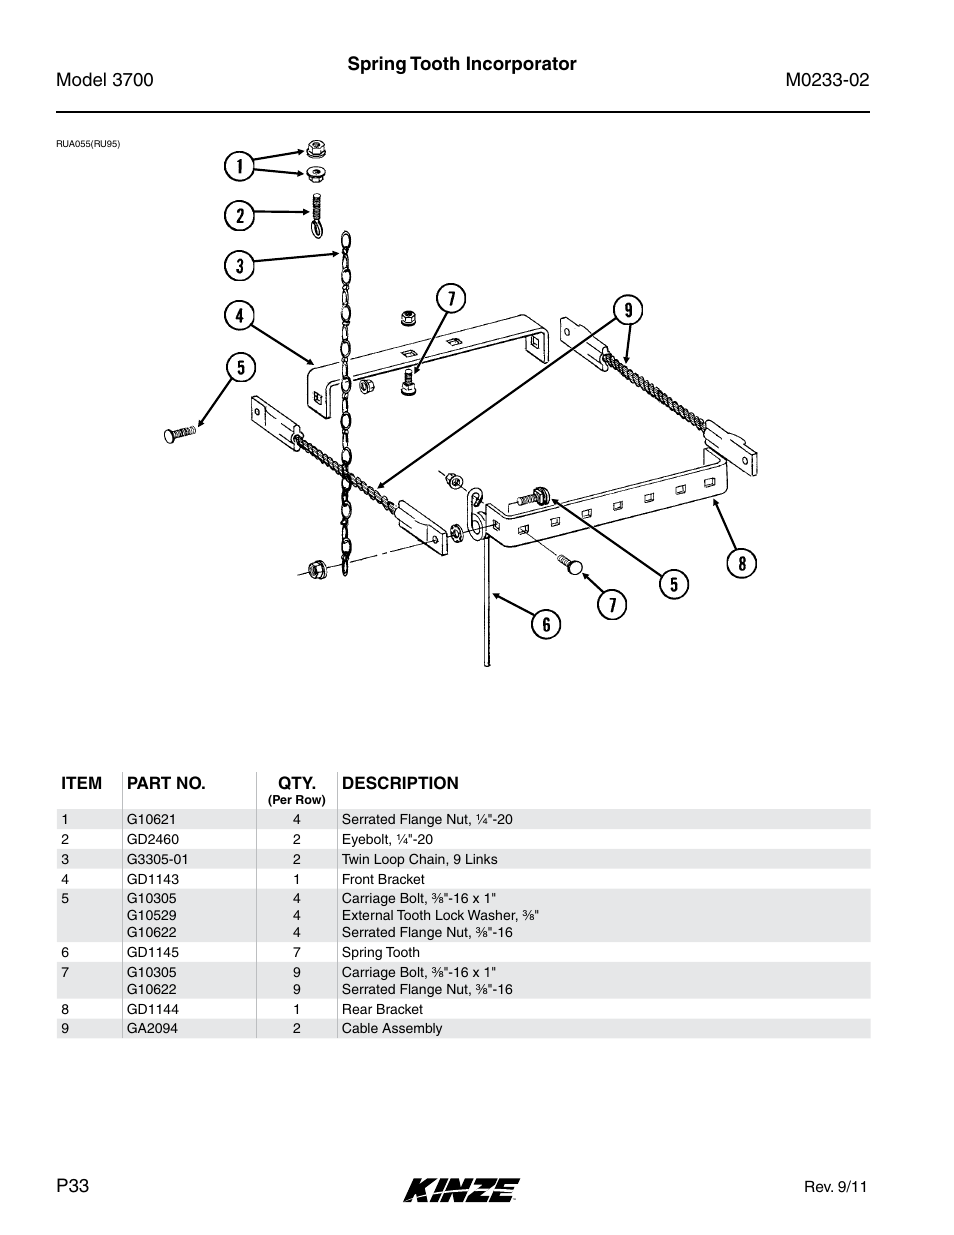 Spring tooth incorporator | Kinze 3700 Front Folding Planter Rev. 6/14 User Manual | Page 36 / 284